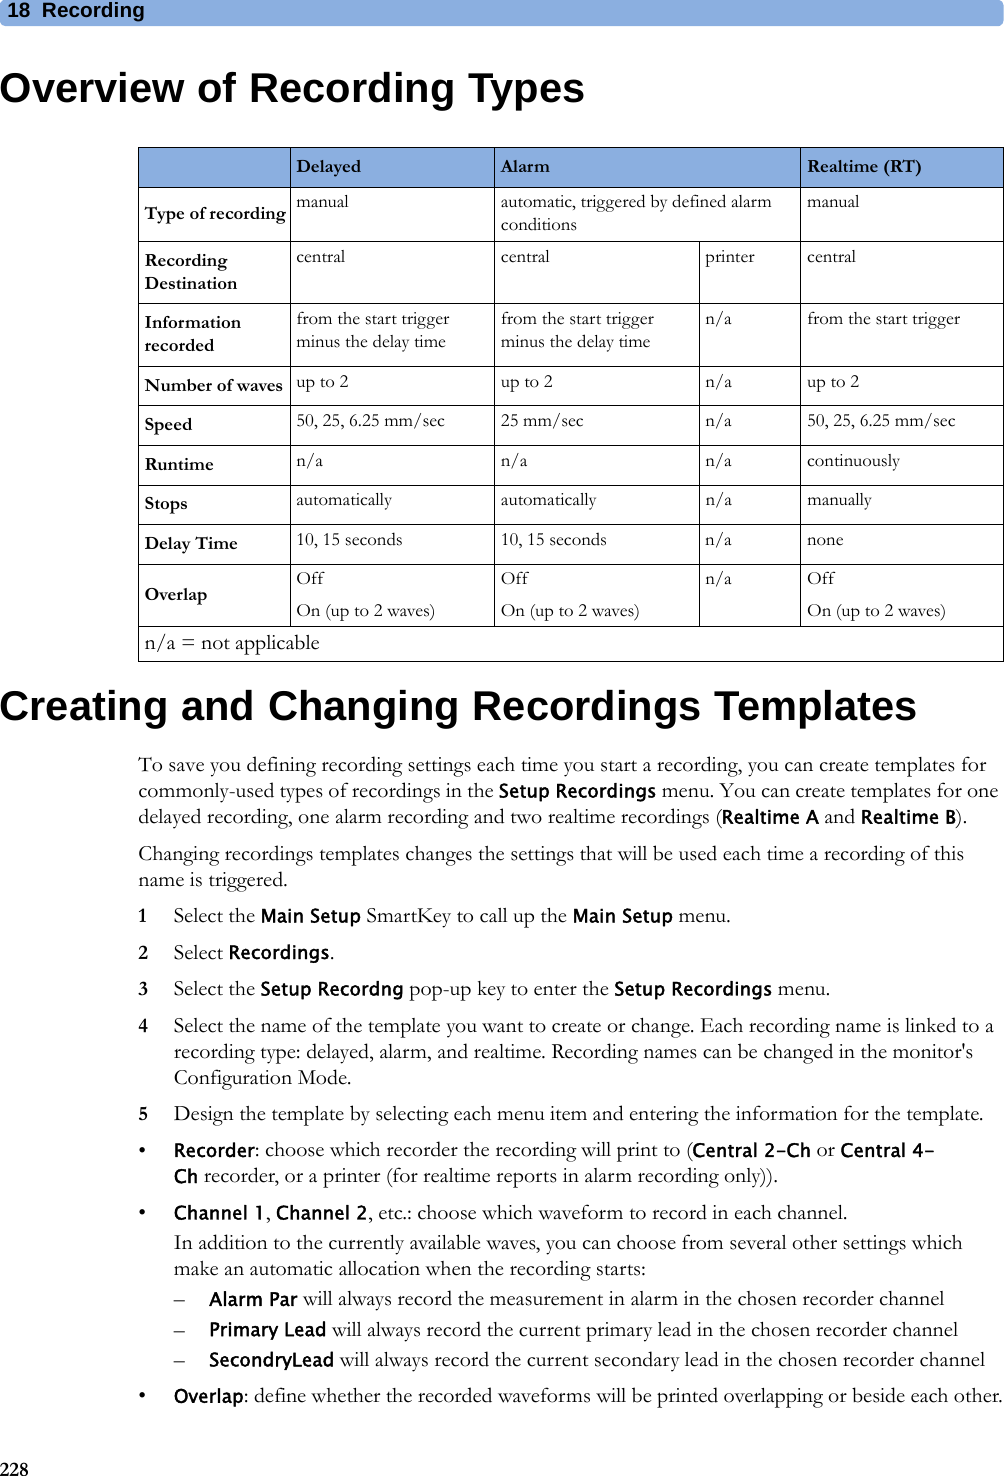 18 Recording228Overview of Recording TypesCreating and Changing Recordings TemplatesTo save you defining recording settings each time you start a recording, you can create templates for commonly-used types of recordings in the Setup Recordings menu. You can create templates for one delayed recording, one alarm recording and two realtime recordings (Realtime A and Realtime B).Changing recordings templates changes the settings that will be used each time a recording of this name is triggered.1Select the Main Setup SmartKey to call up the Main Setup menu.2Select Recordings.3Select the Setup Recordng pop-up key to enter the Setup Recordings menu.4Select the name of the template you want to create or change. Each recording name is linked to a recording type: delayed, alarm, and realtime. Recording names can be changed in the monitor&apos;s Configuration Mode.5Design the template by selecting each menu item and entering the information for the template.•Recorder: choose which recorder the recording will print to (Central 2-Ch or Central 4-Ch recorder, or a printer (for realtime reports in alarm recording only)). •Channel 1, Channel 2, etc.: choose which waveform to record in each channel.In addition to the currently available waves, you can choose from several other settings which make an automatic allocation when the recording starts:–Alarm Par will always record the measurement in alarm in the chosen recorder channel–Primary Lead will always record the current primary lead in the chosen recorder channel–SecondryLead will always record the current secondary lead in the chosen recorder channel•Overlap: define whether the recorded waveforms will be printed overlapping or beside each other.Delayed Alarm Realtime (RT)Type of recording manual automatic, triggered by defined alarm conditionsmanualRecording Destinationcentral central printer centralInformation recordedfrom the start trigger minus the delay timefrom the start trigger minus the delay timen/a from the start triggerNumber of waves up to 2 up to 2 n/a up to 2Speed 50, 25, 6.25 mm/sec 25 mm/sec n/a 50, 25, 6.25 mm/secRuntime n/a n/a n/a continuouslyStops automatically automatically n/a manuallyDelay Time 10, 15 seconds 10, 15 seconds n/a noneOverlap OffOn (up to 2 waves)OffOn (up to 2 waves)n/a OffOn (up to 2 waves)n/a = not applicable